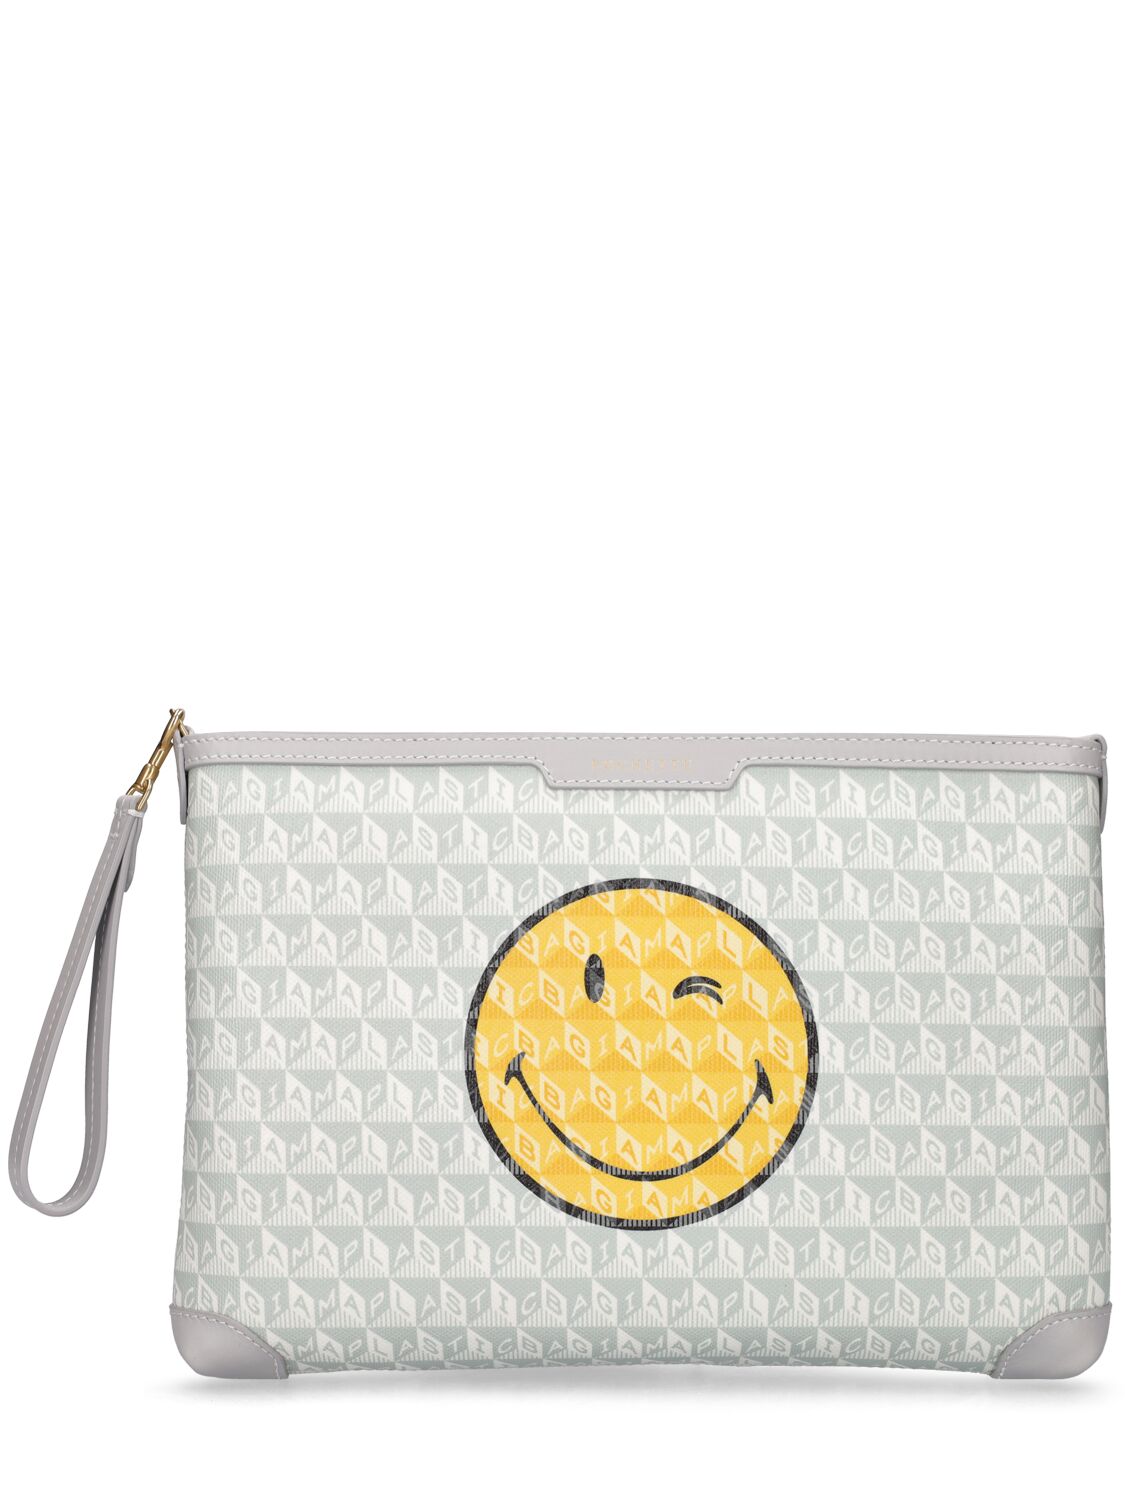 Anya Hindmarch I Am A Plastic Bag Wink Clutch In Frost